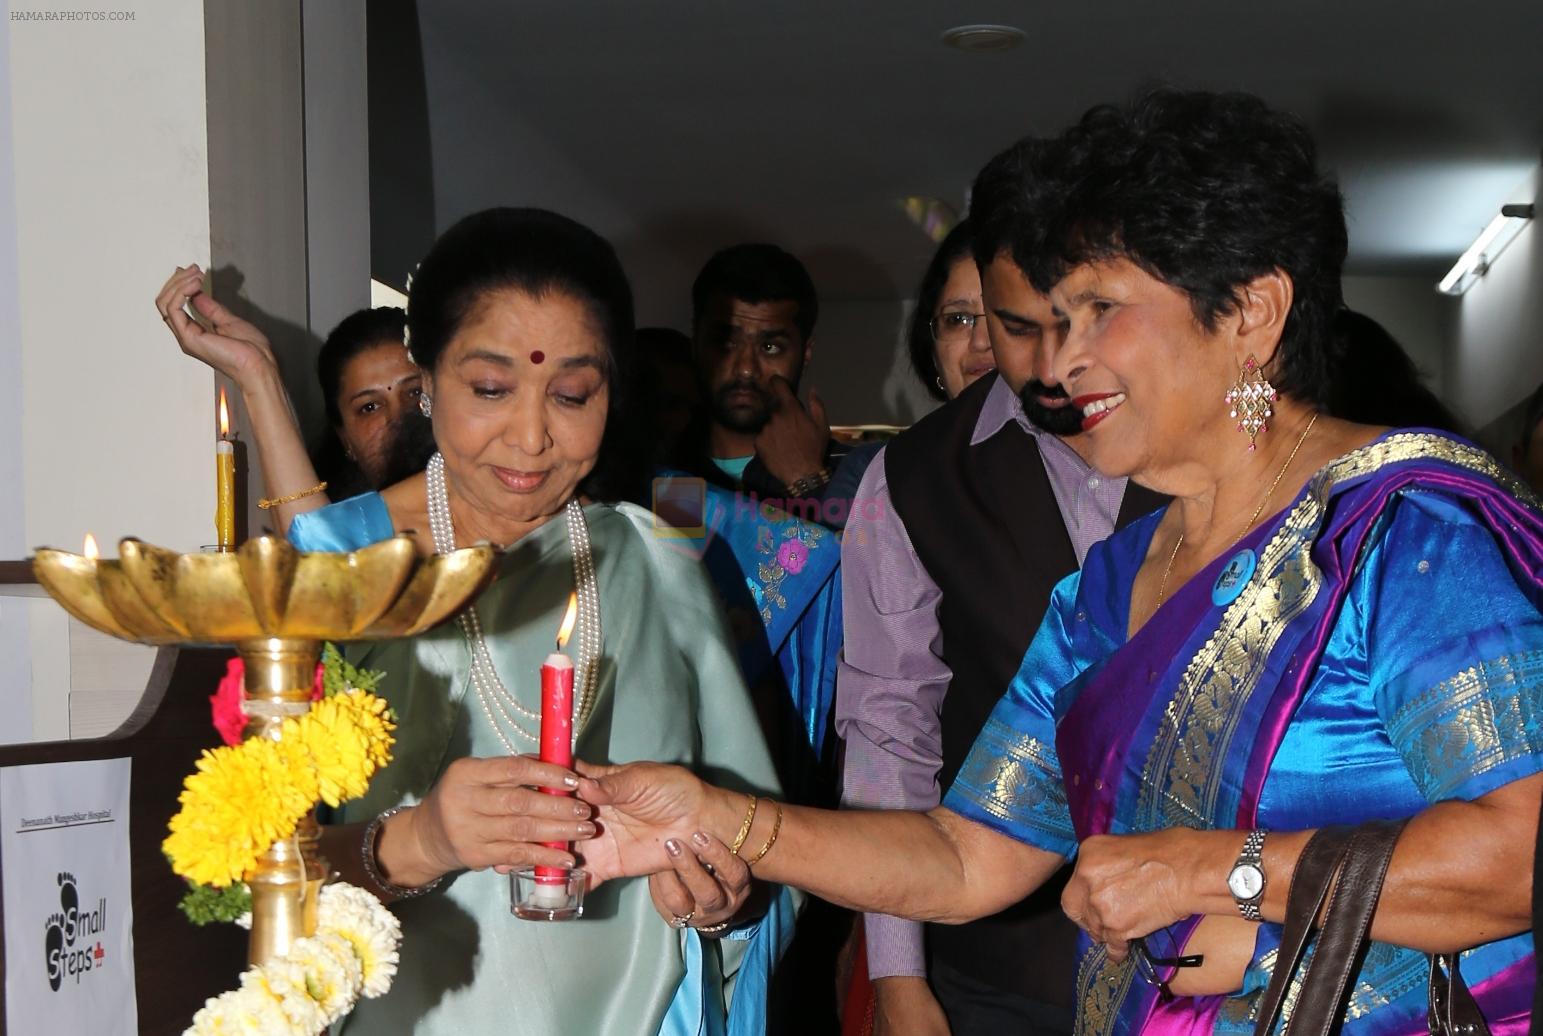 Asha Bhosle inaugurates Small Steps Morris Autism and Child Development Centre at Deenanath Mangeshkar Hospital. Seen in the pic with her is Dr.Anjali Morris